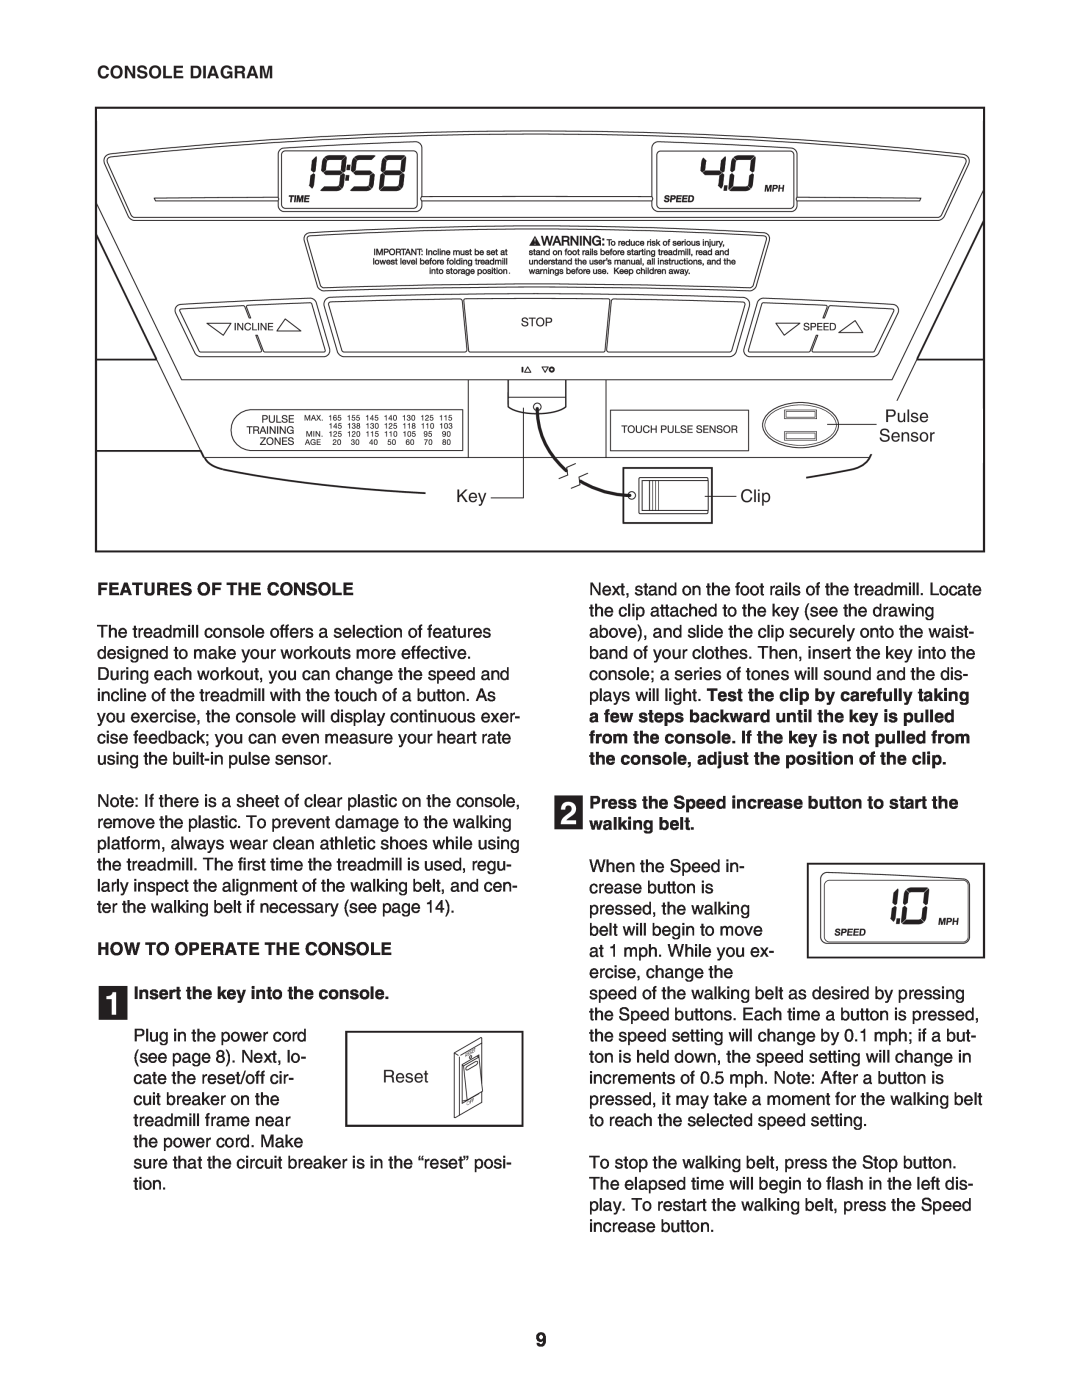 Image IMTL41205.0 Console Diagram, Features Of The Console, HOW TO OPERATE THE CONSOLE 1 Insert the key into the console 